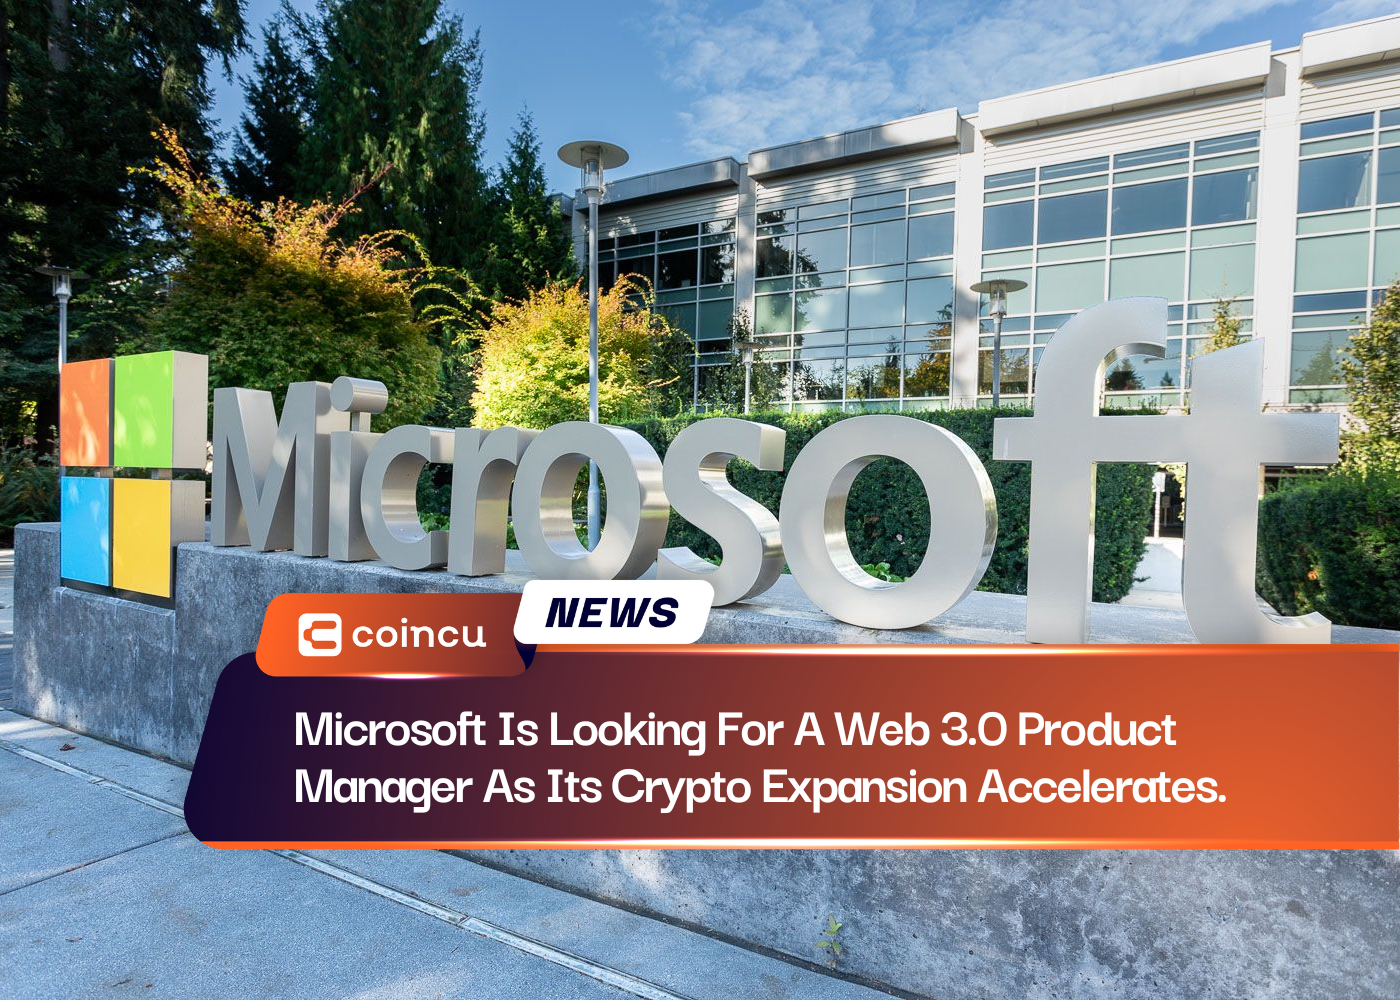 Microsoft Is Looking For A Web 3.0 Product Manager As Its Crypto Expansion Accelerates.